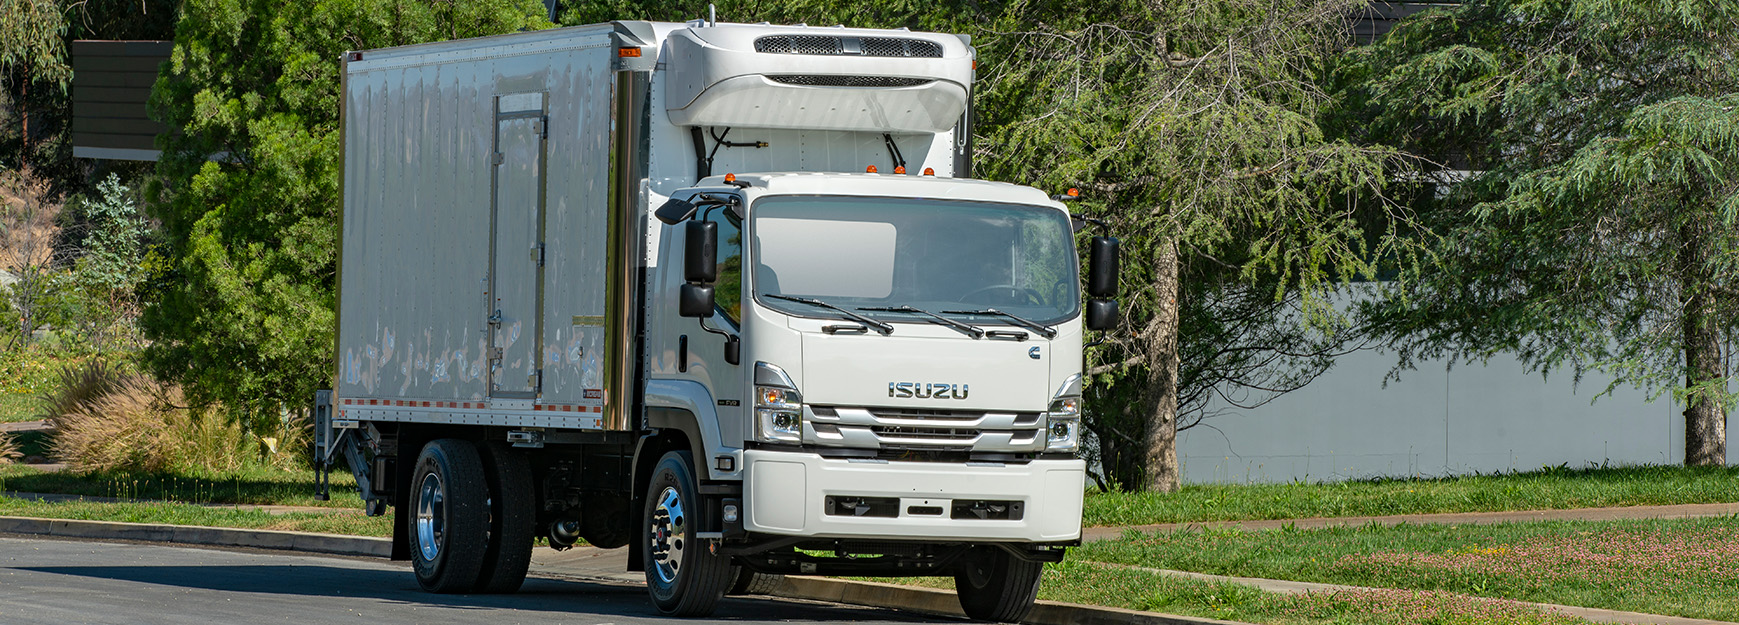 Isuzu Commercial Truck being used to make deliveries.